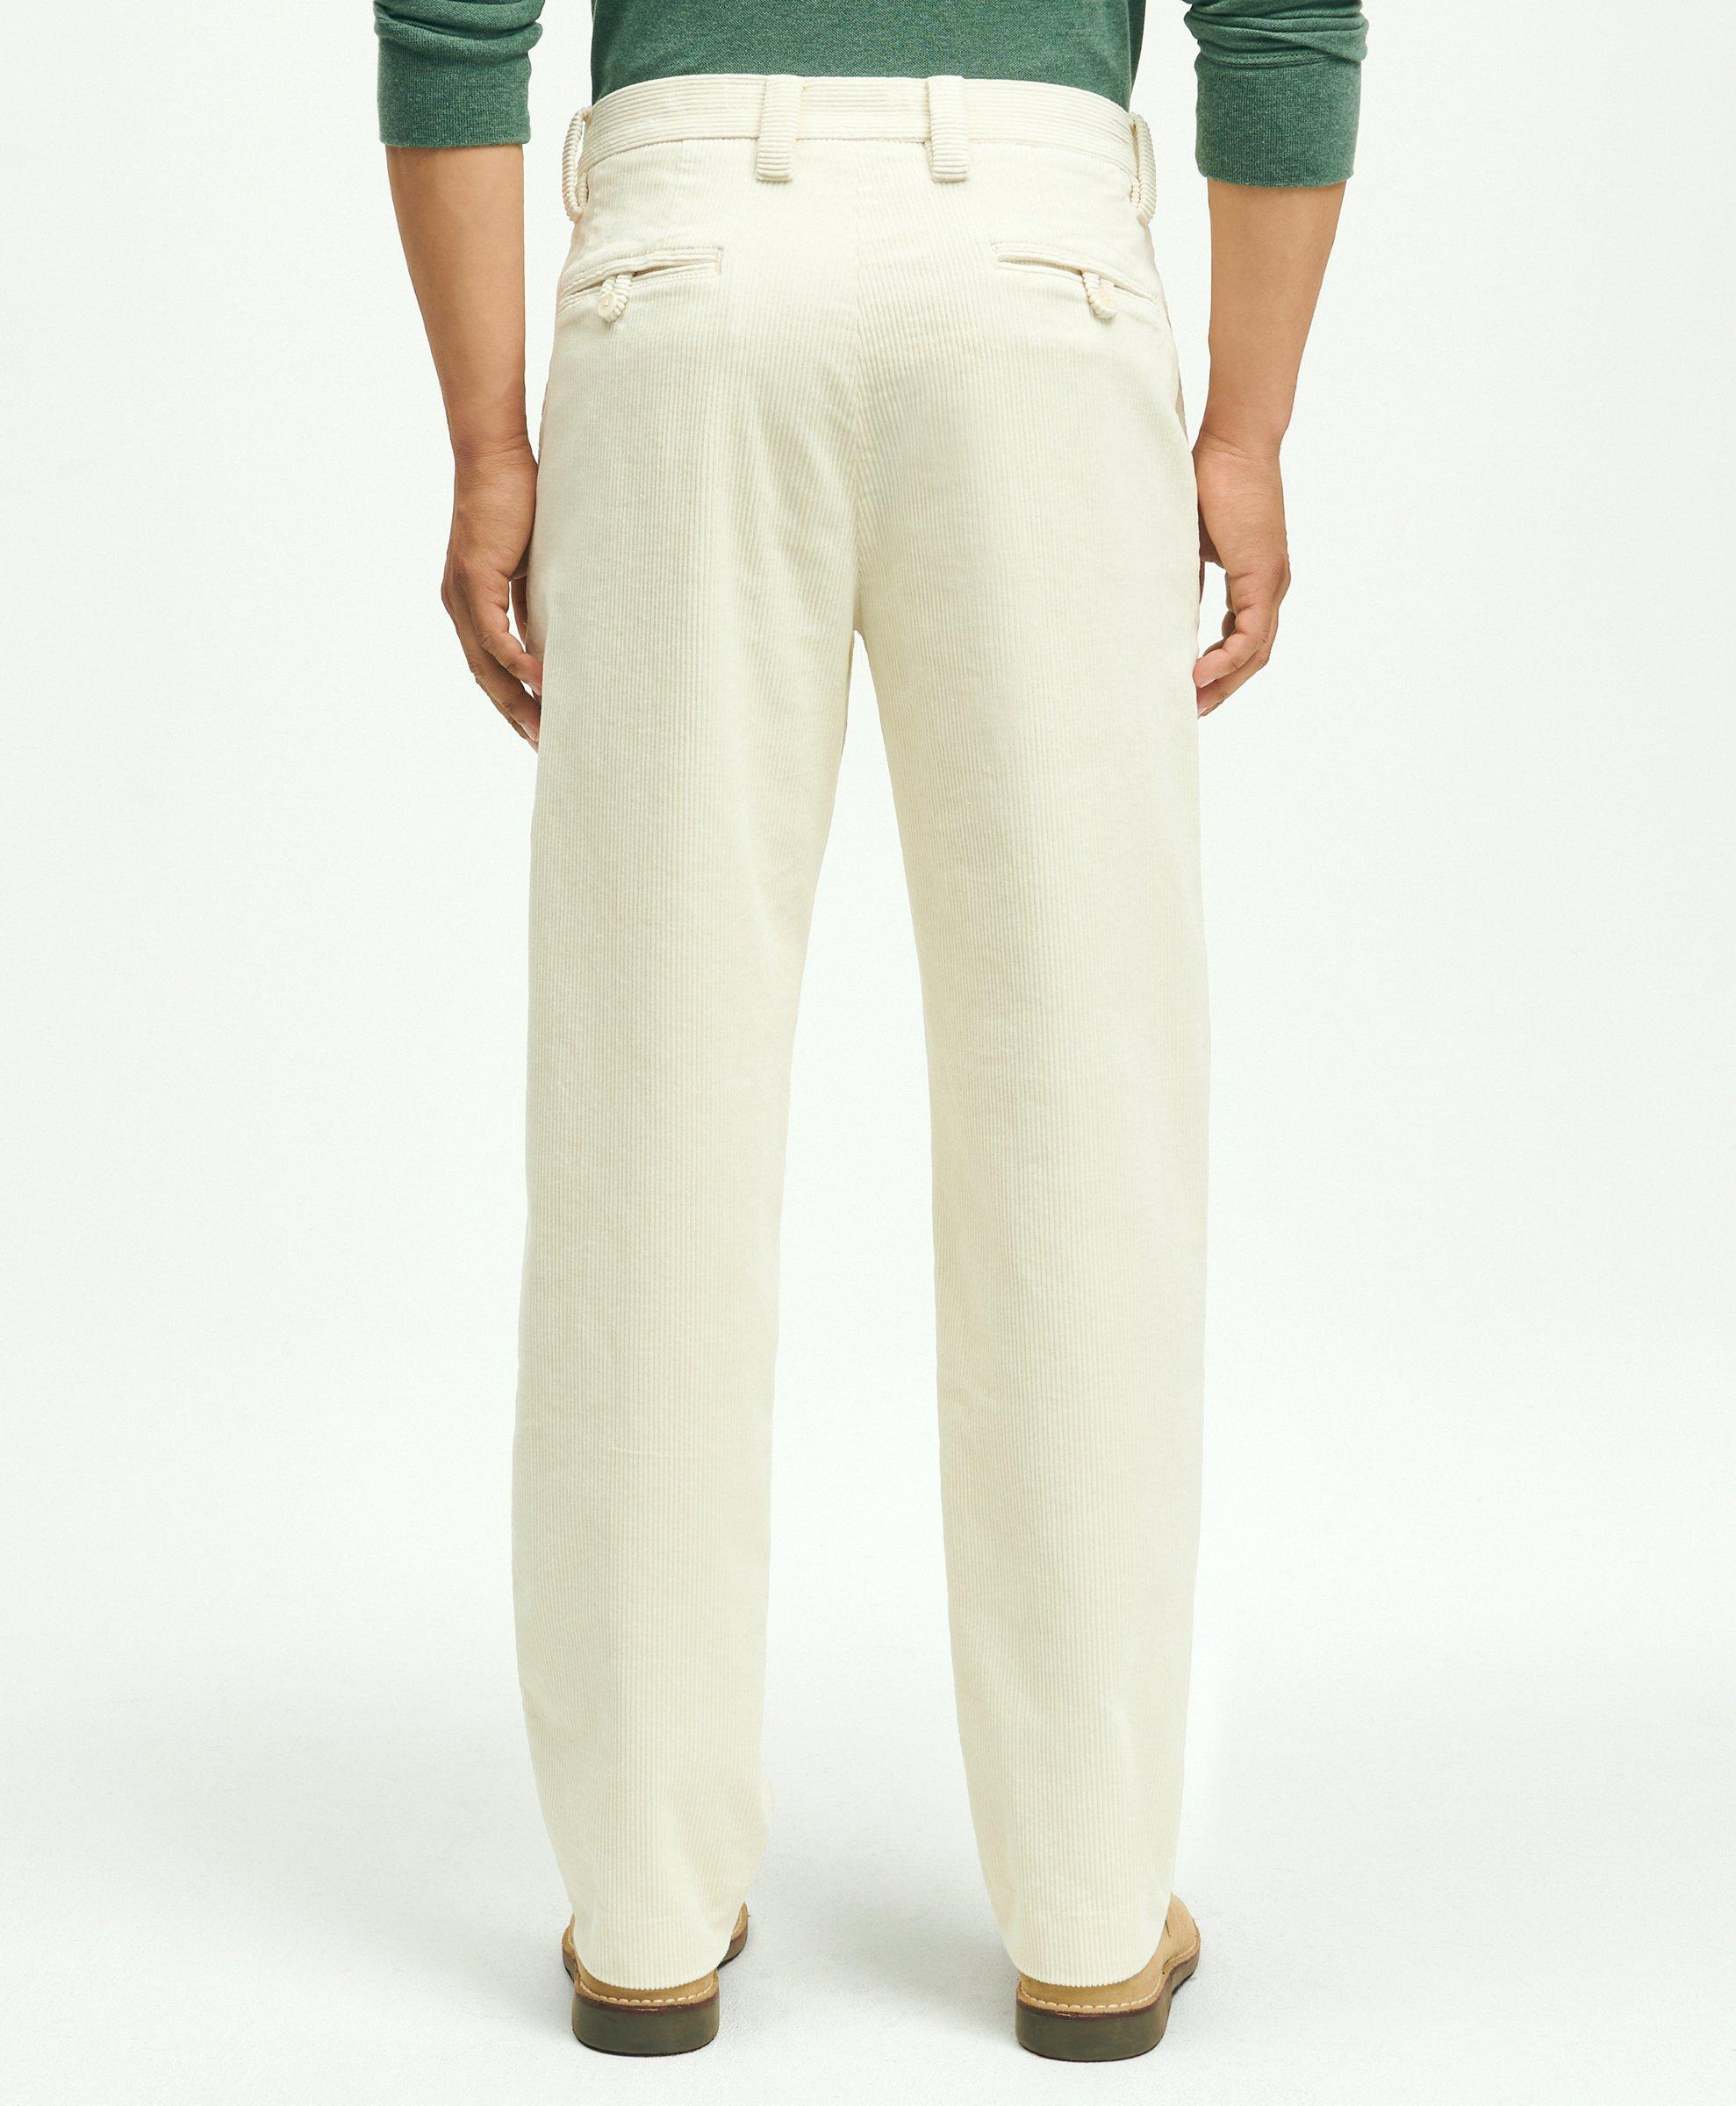 WIDE WALE CORDUROY PULL-UP PANT